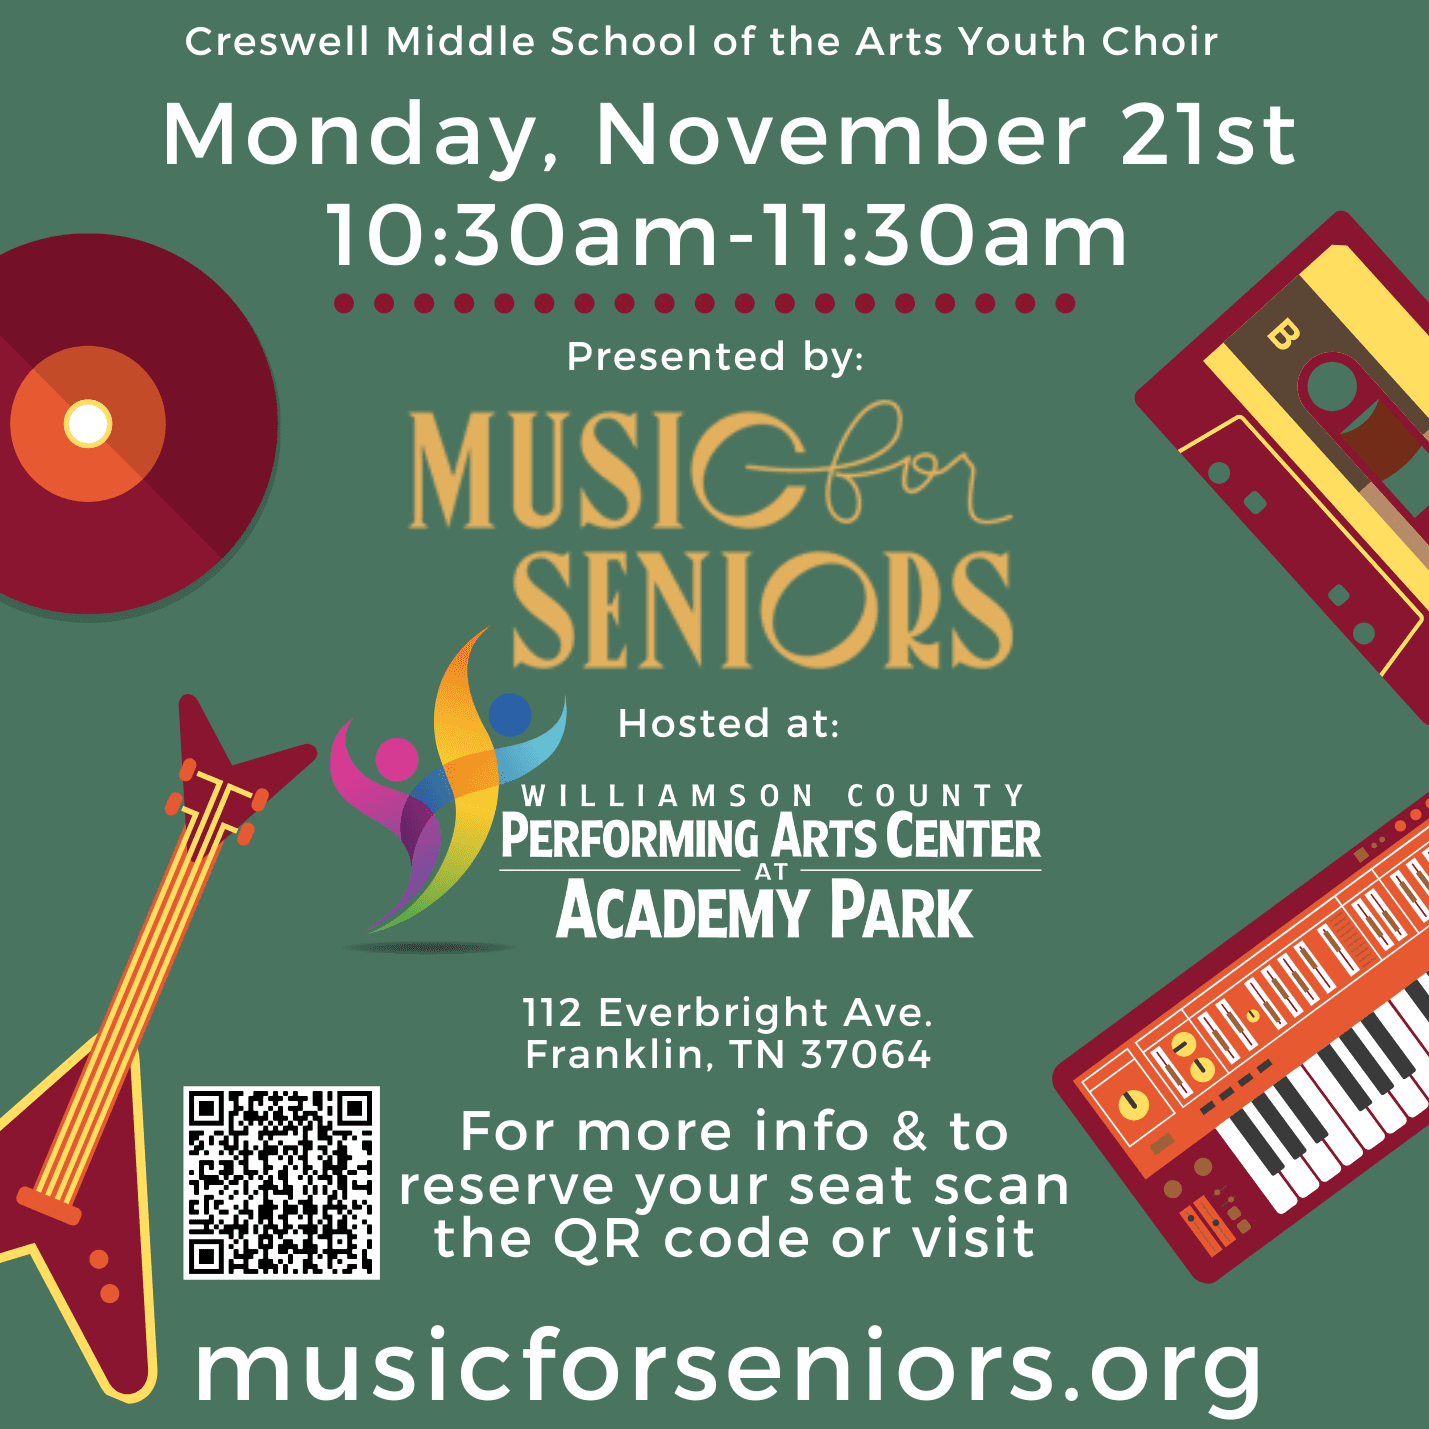 Music for Seniors, a Franklin, TN event and variety program of wonderful music performed by the talented student choir from Creswell Middle School of the Arts!